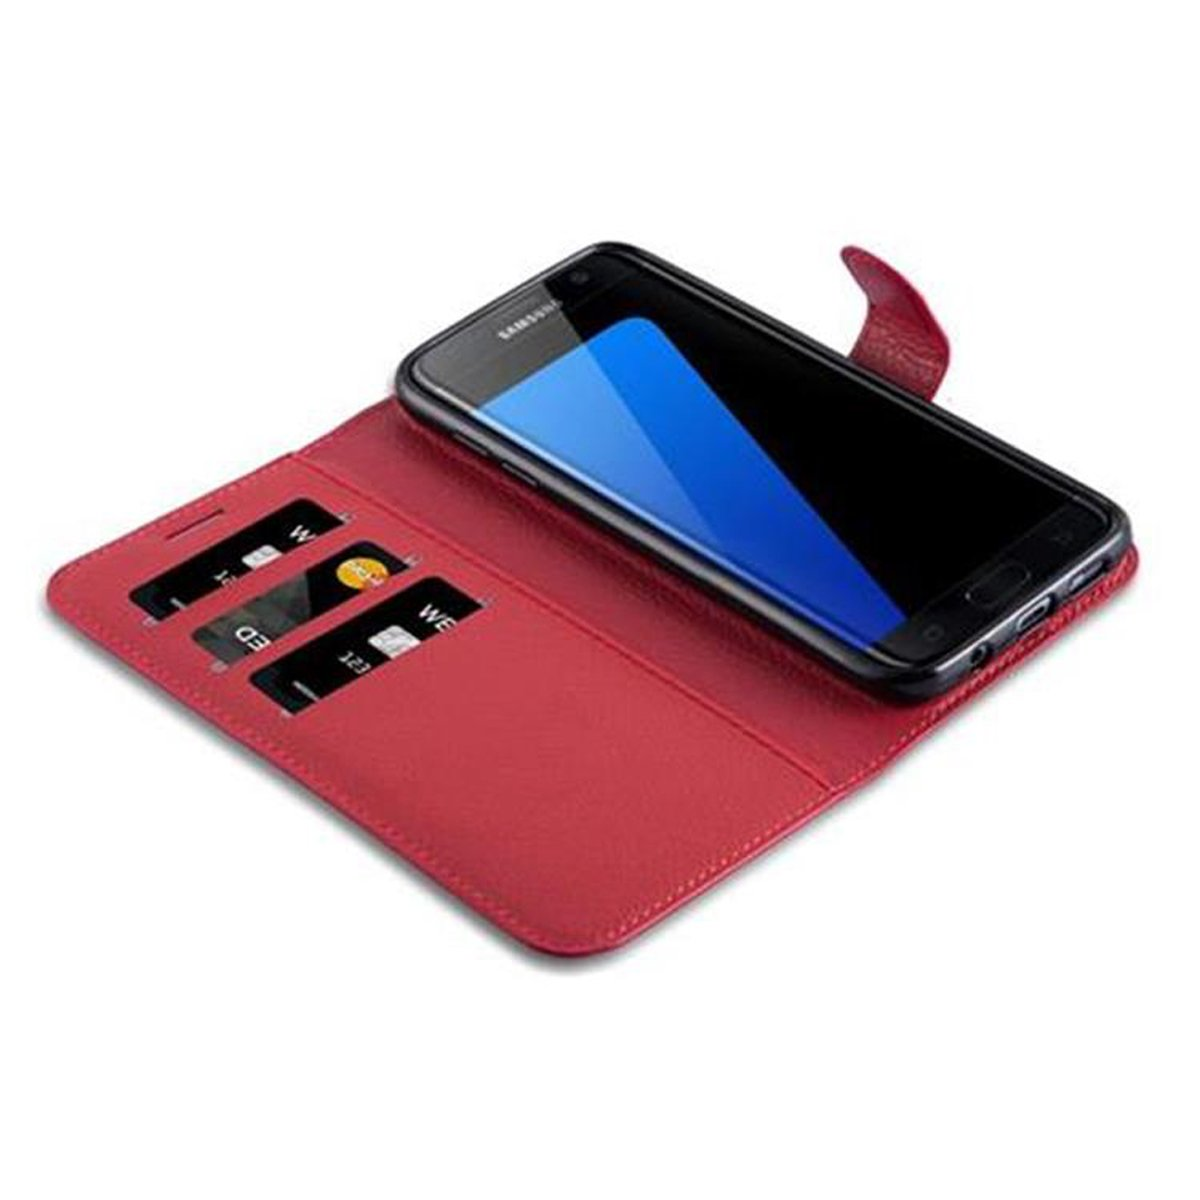 CADORABO Book Hülle Galaxy EDGE, Samsung, S7 ROT Bookcover, Standfunktion, KARMIN